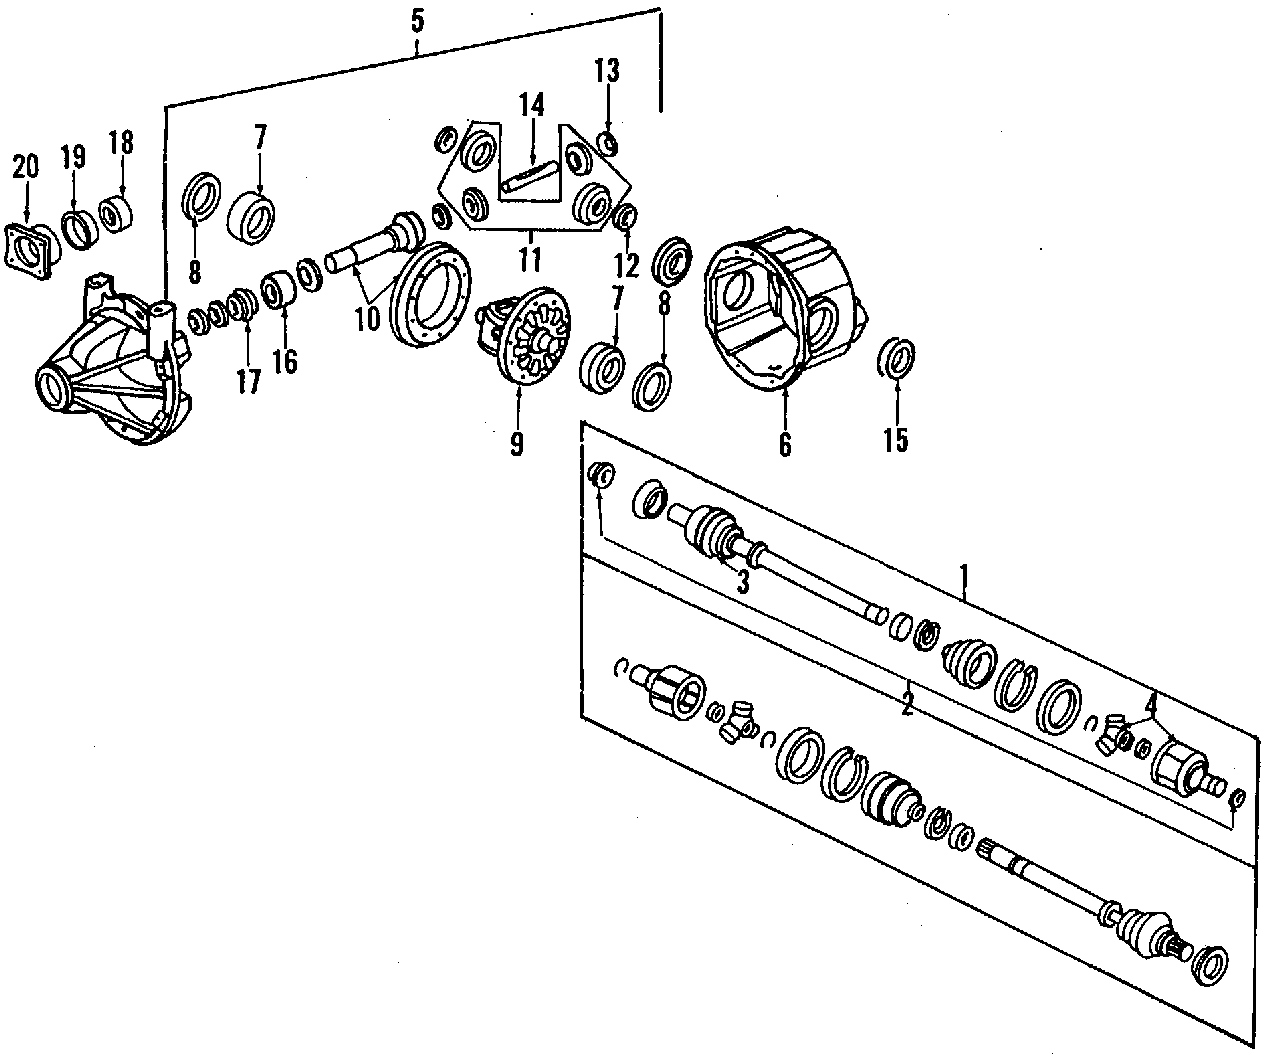 1REAR AXLE. AXLE SHAFTS & JOINTS. DIFFERENTIAL. PROPELLER SHAFT.https://images.simplepart.com/images/parts/motor/fullsize/F640360.png